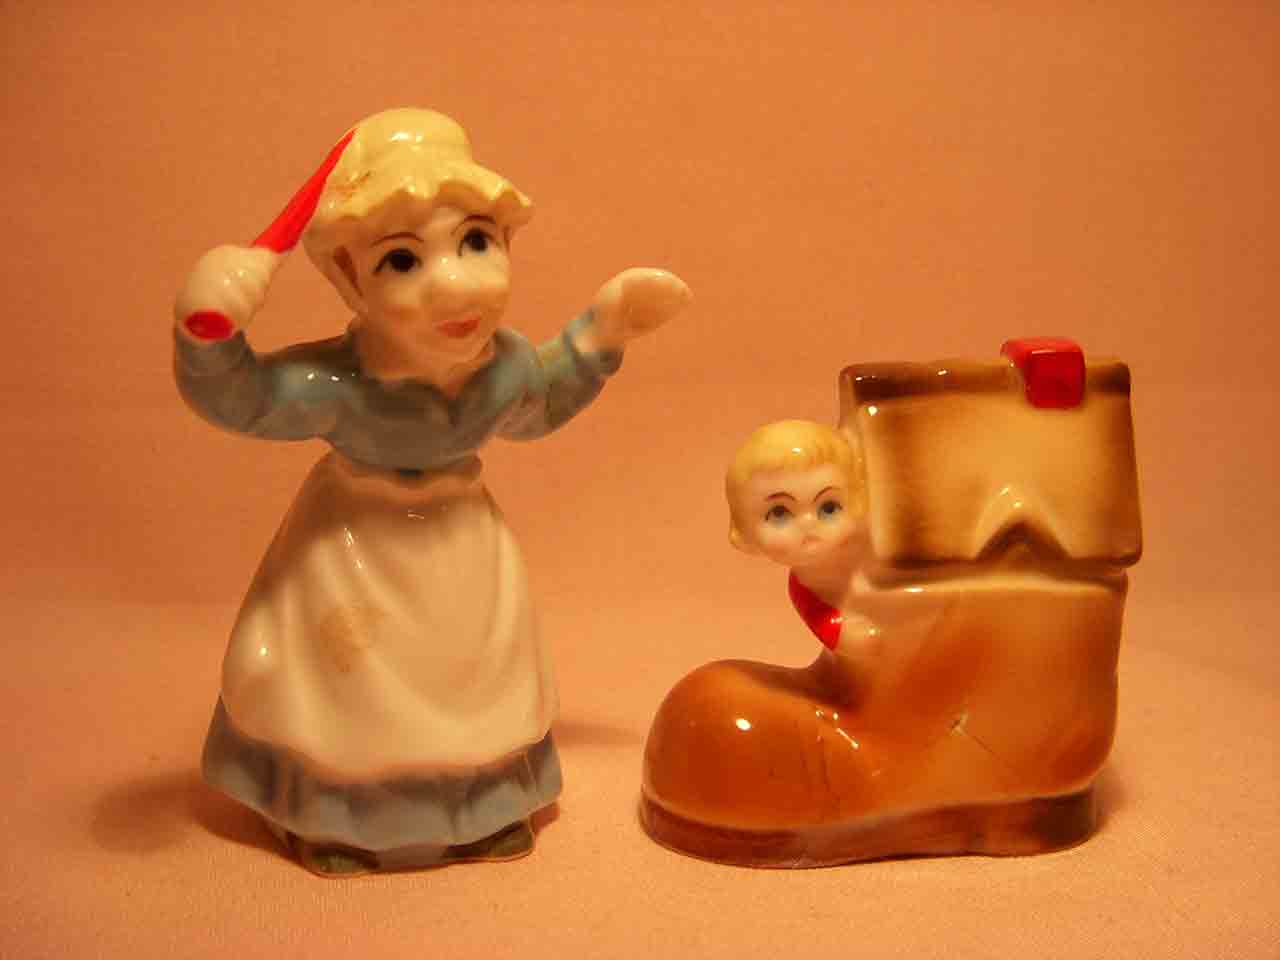 Bone China miniature nursery rhymes salt and pepper shakers - Old Woman in the Shoes